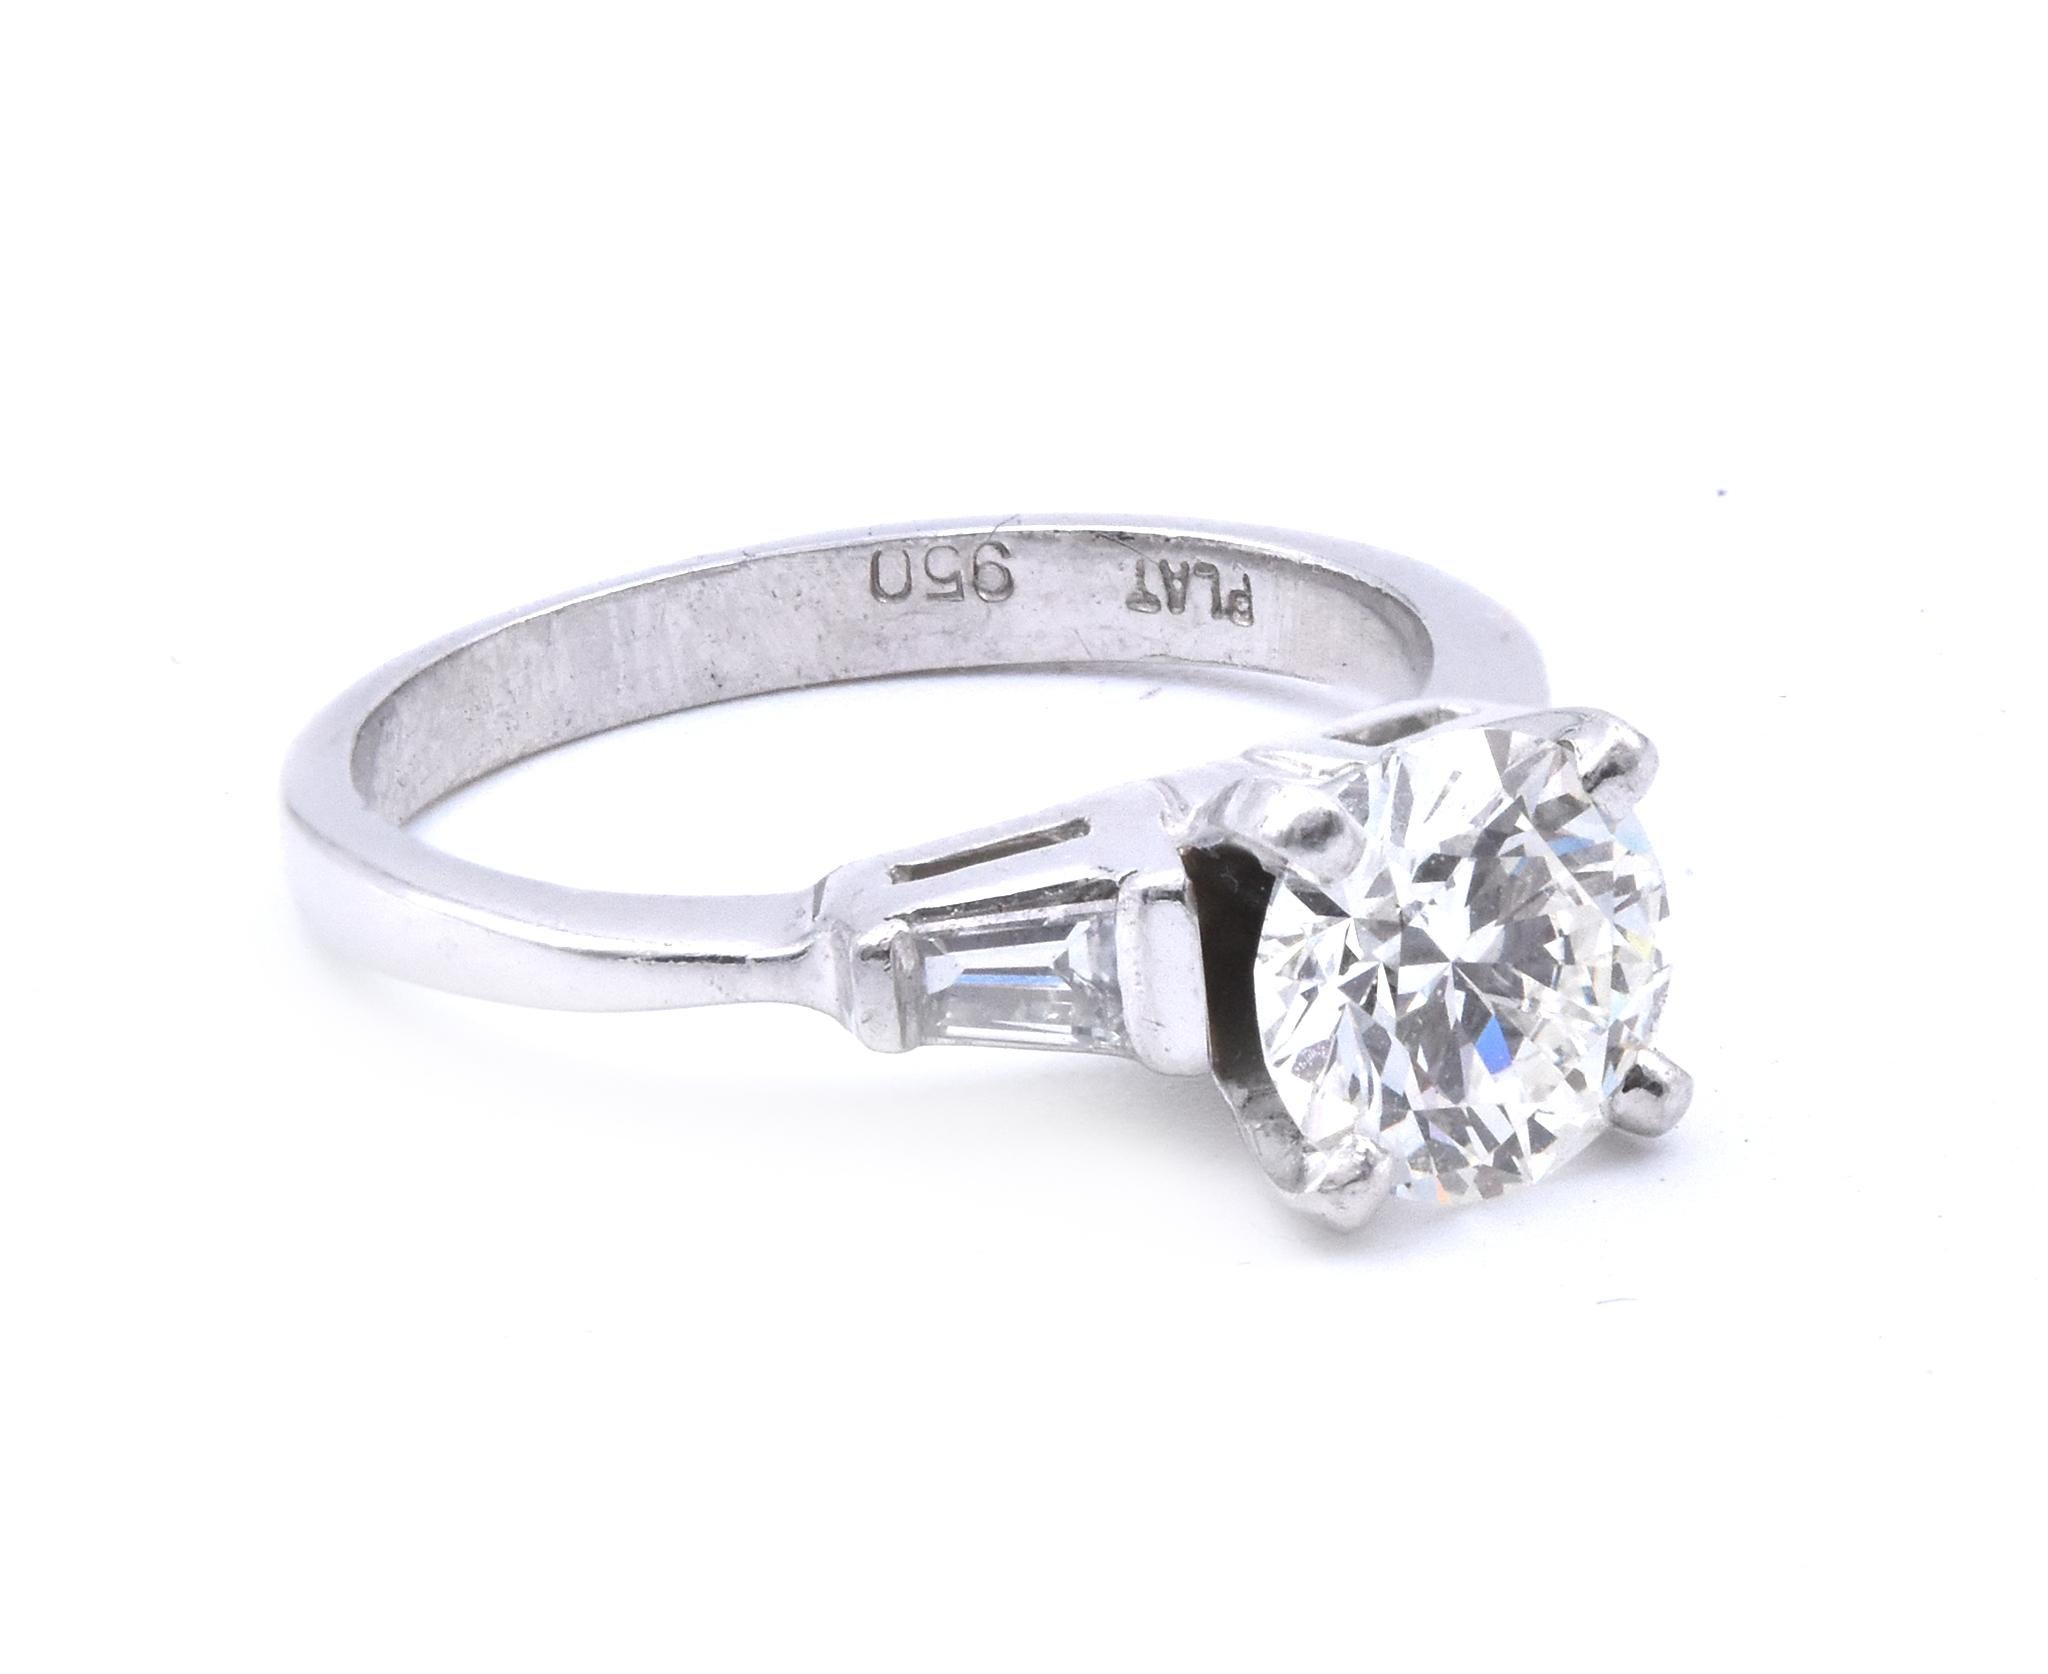 Material: platinum
Center Diamond: 1 round brilliant cut = 1.09ct
Color: H
Clarity: VS1
AGS Cert#: 0005839XXX
Diamonds: 2 baguette cut = 0.20cttw
Color: H
Clarity: VS2
Ring Size: 5  (please allow up to 2 additional business days for sizing